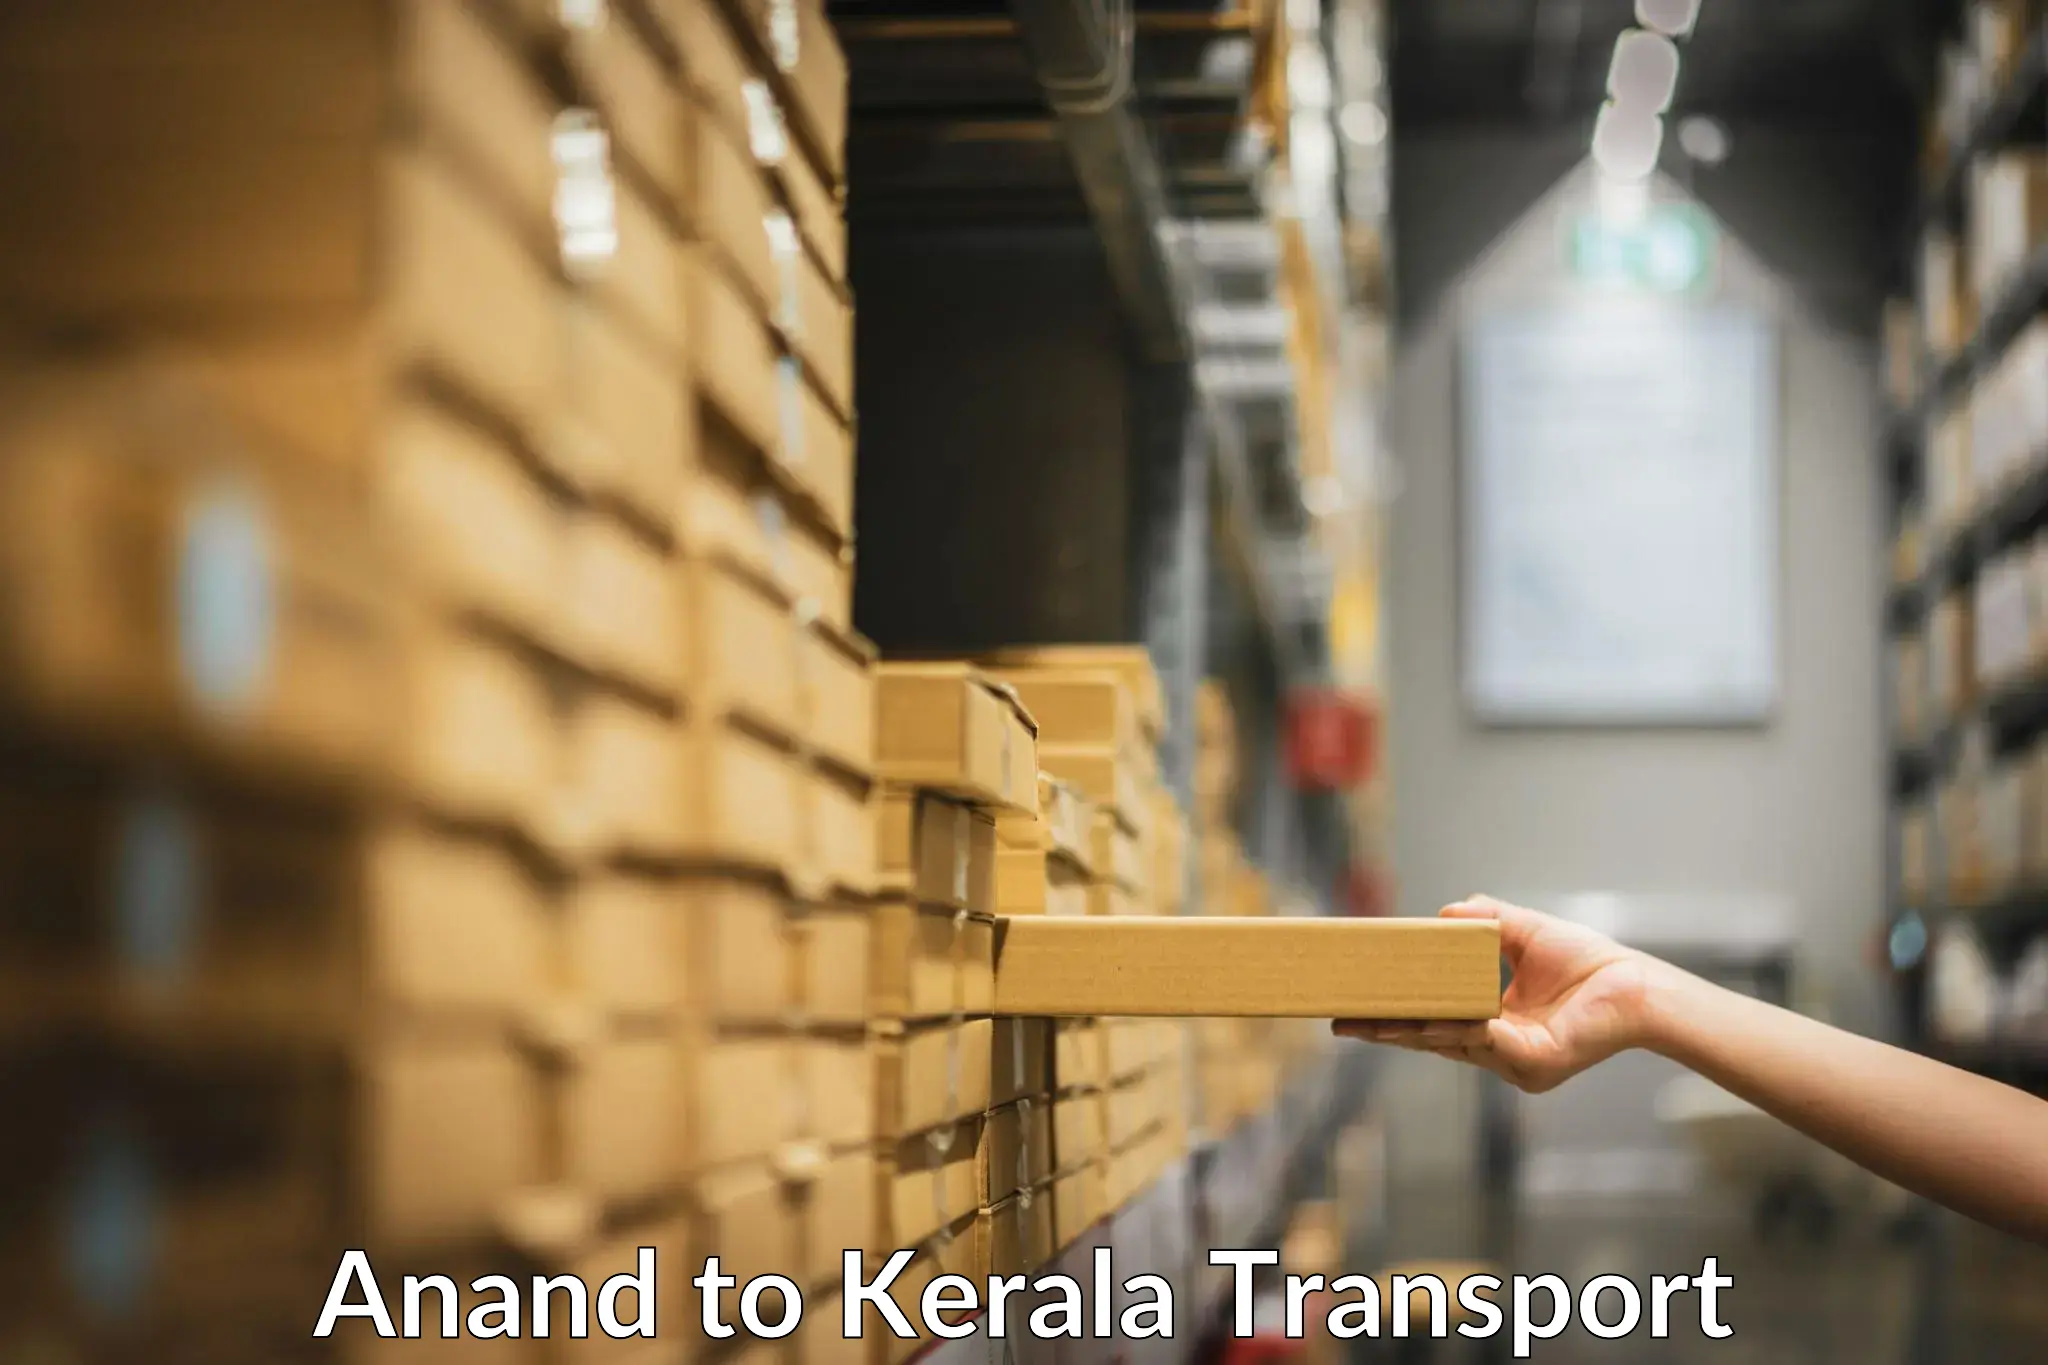 Air freight transport services Anand to Cochin University of Science and Technology